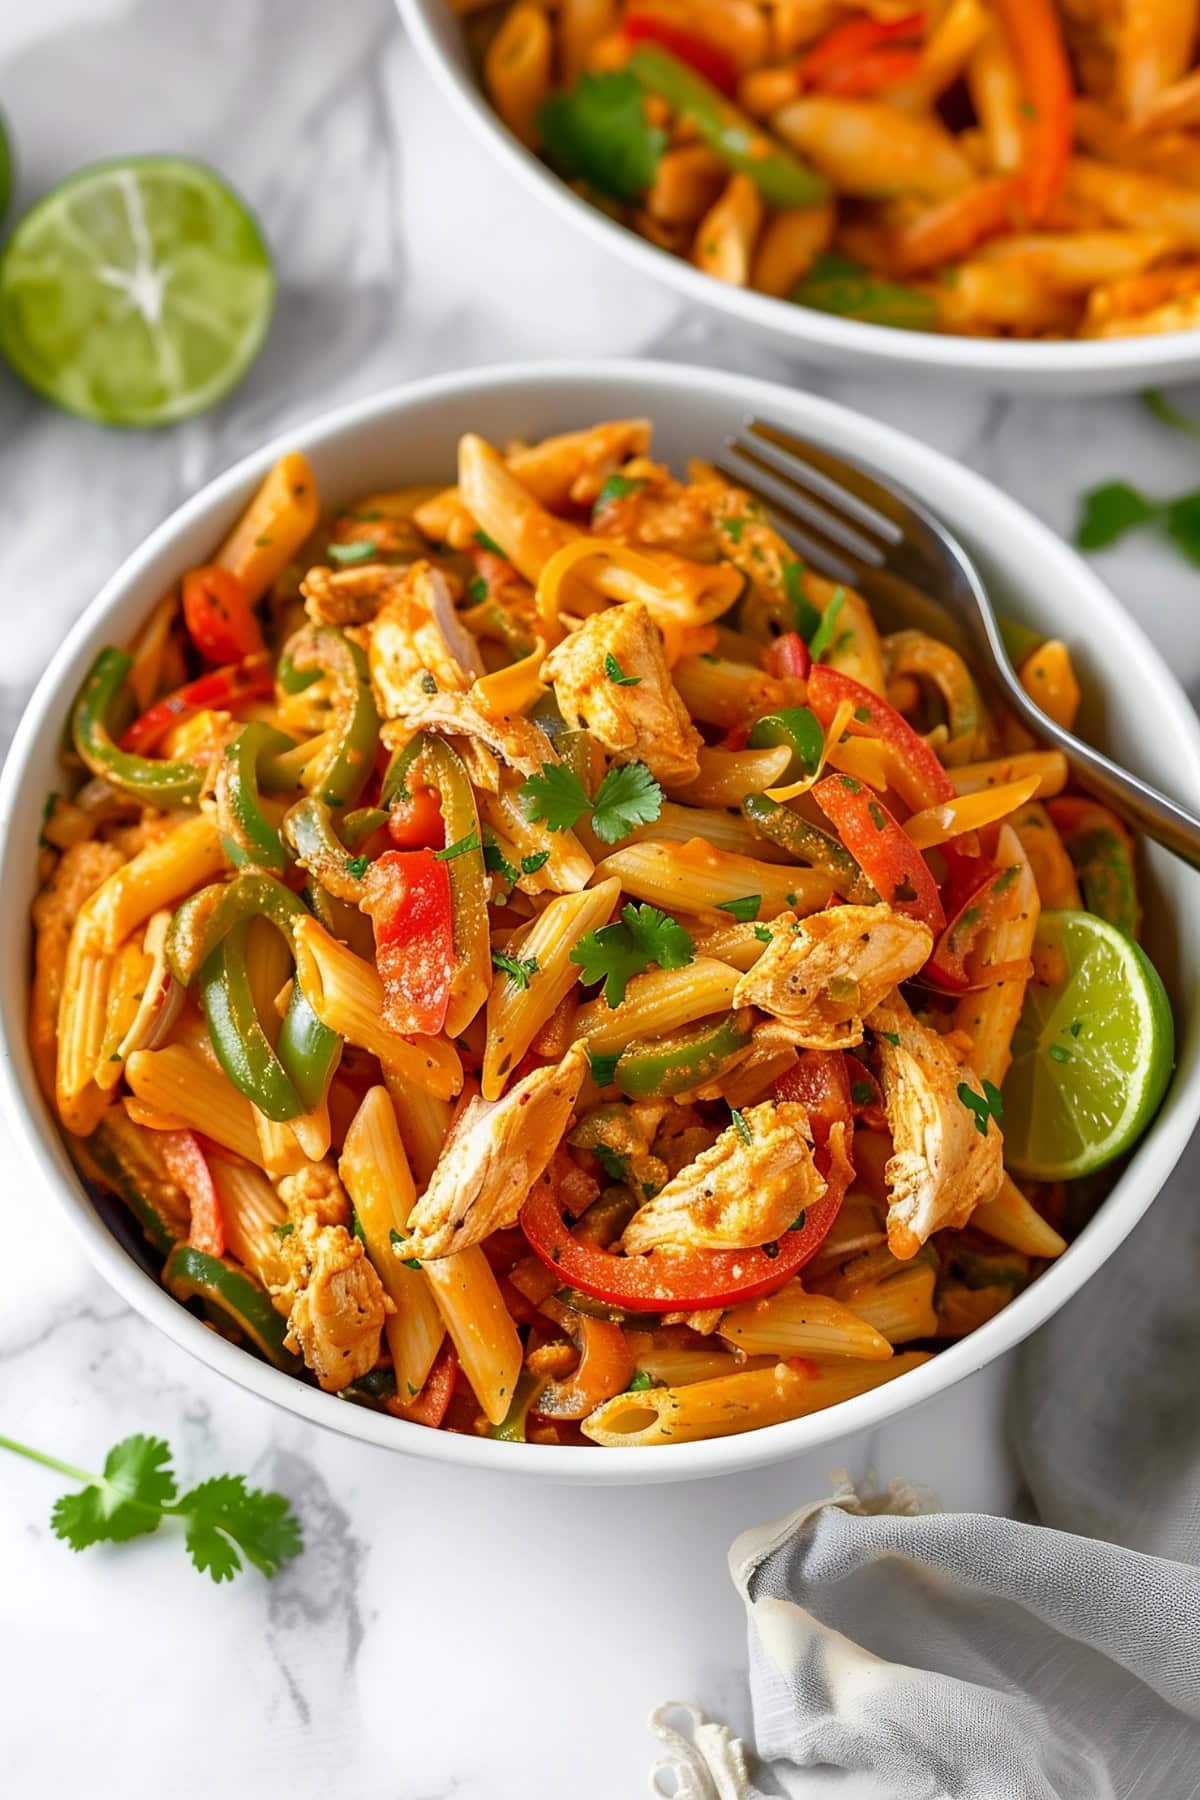 Homemade chicken fajita pasta with green and red bell peppers, garnished with lime